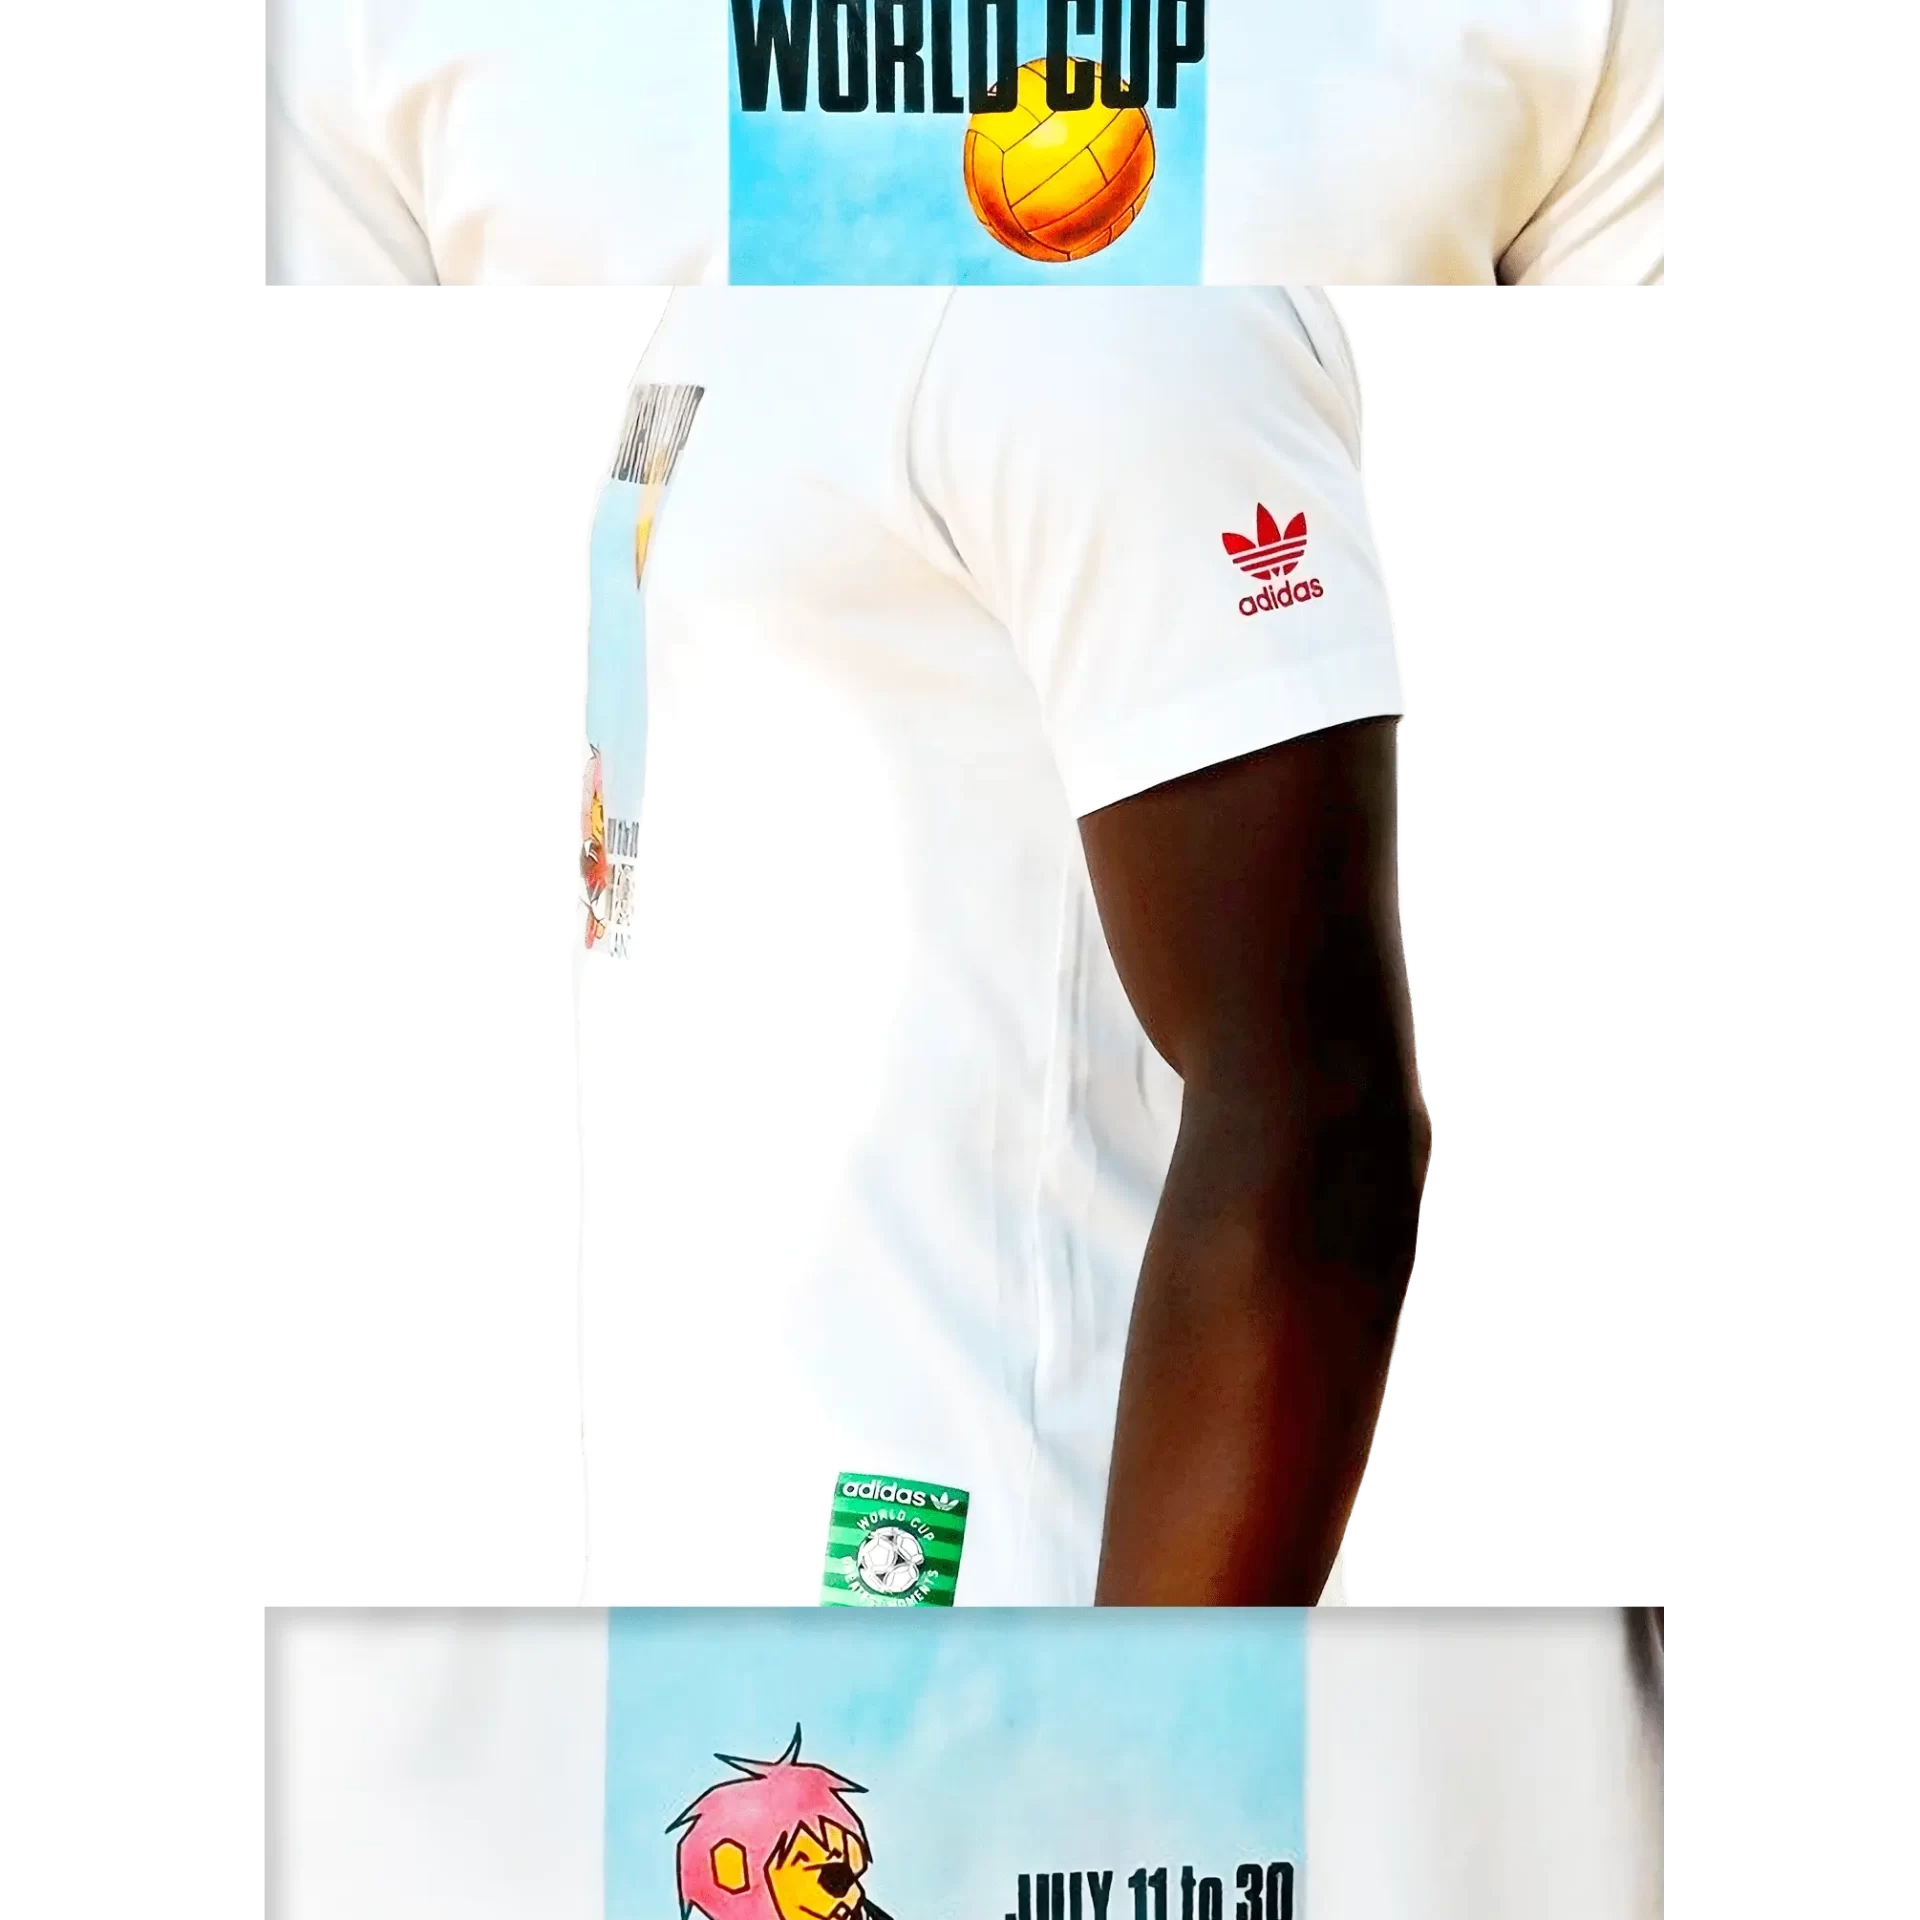 Men's 2006 England '66 FIFA World Cup T-Shirt by Adidas: Conclusive (EnLawded.com file #lmchk69164ip2y123840kg9st)